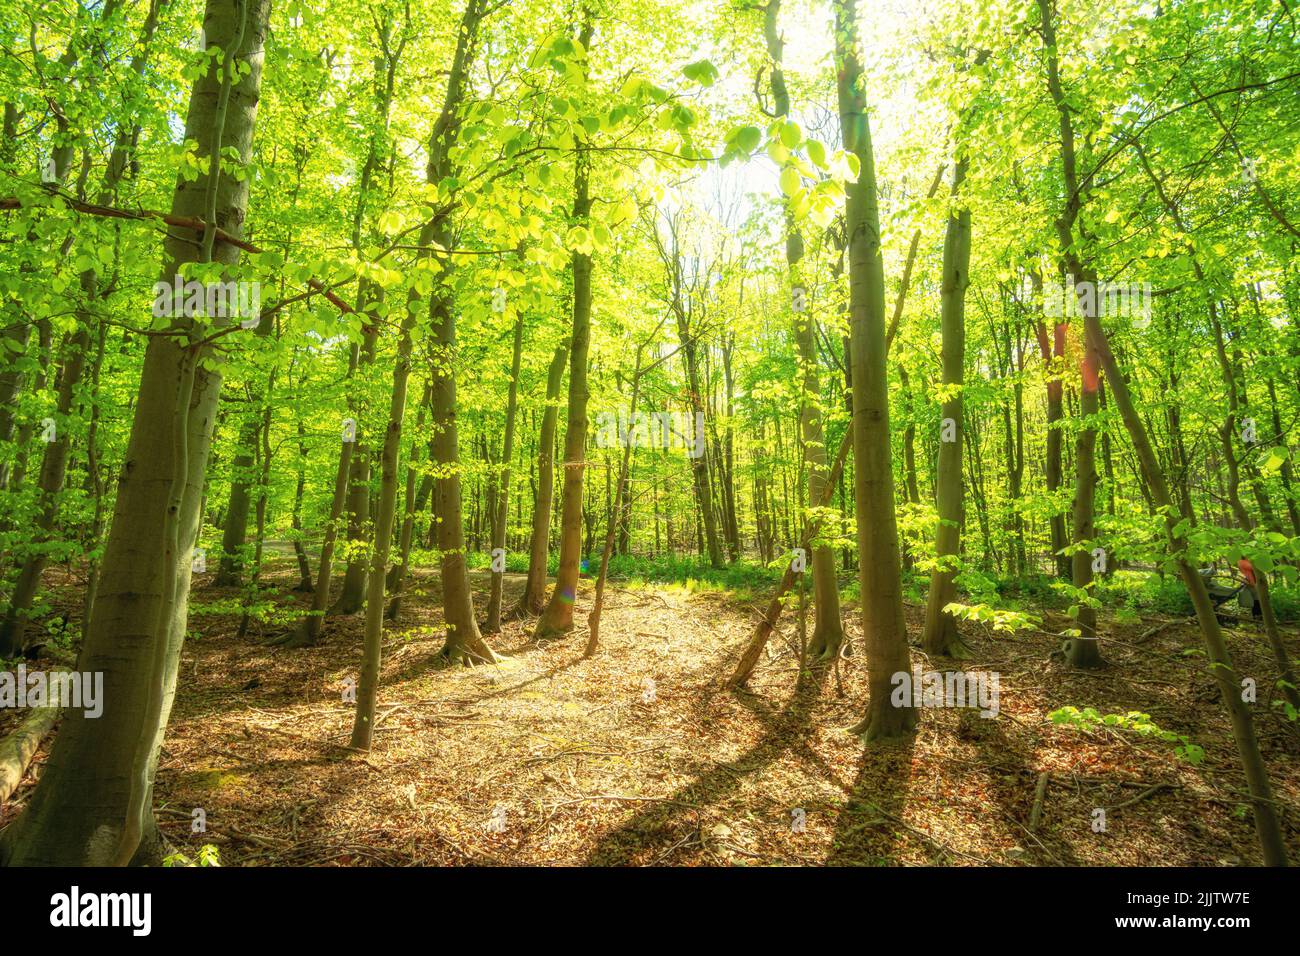 Green fresh mixed forest in spring with sunshine Stock Photo